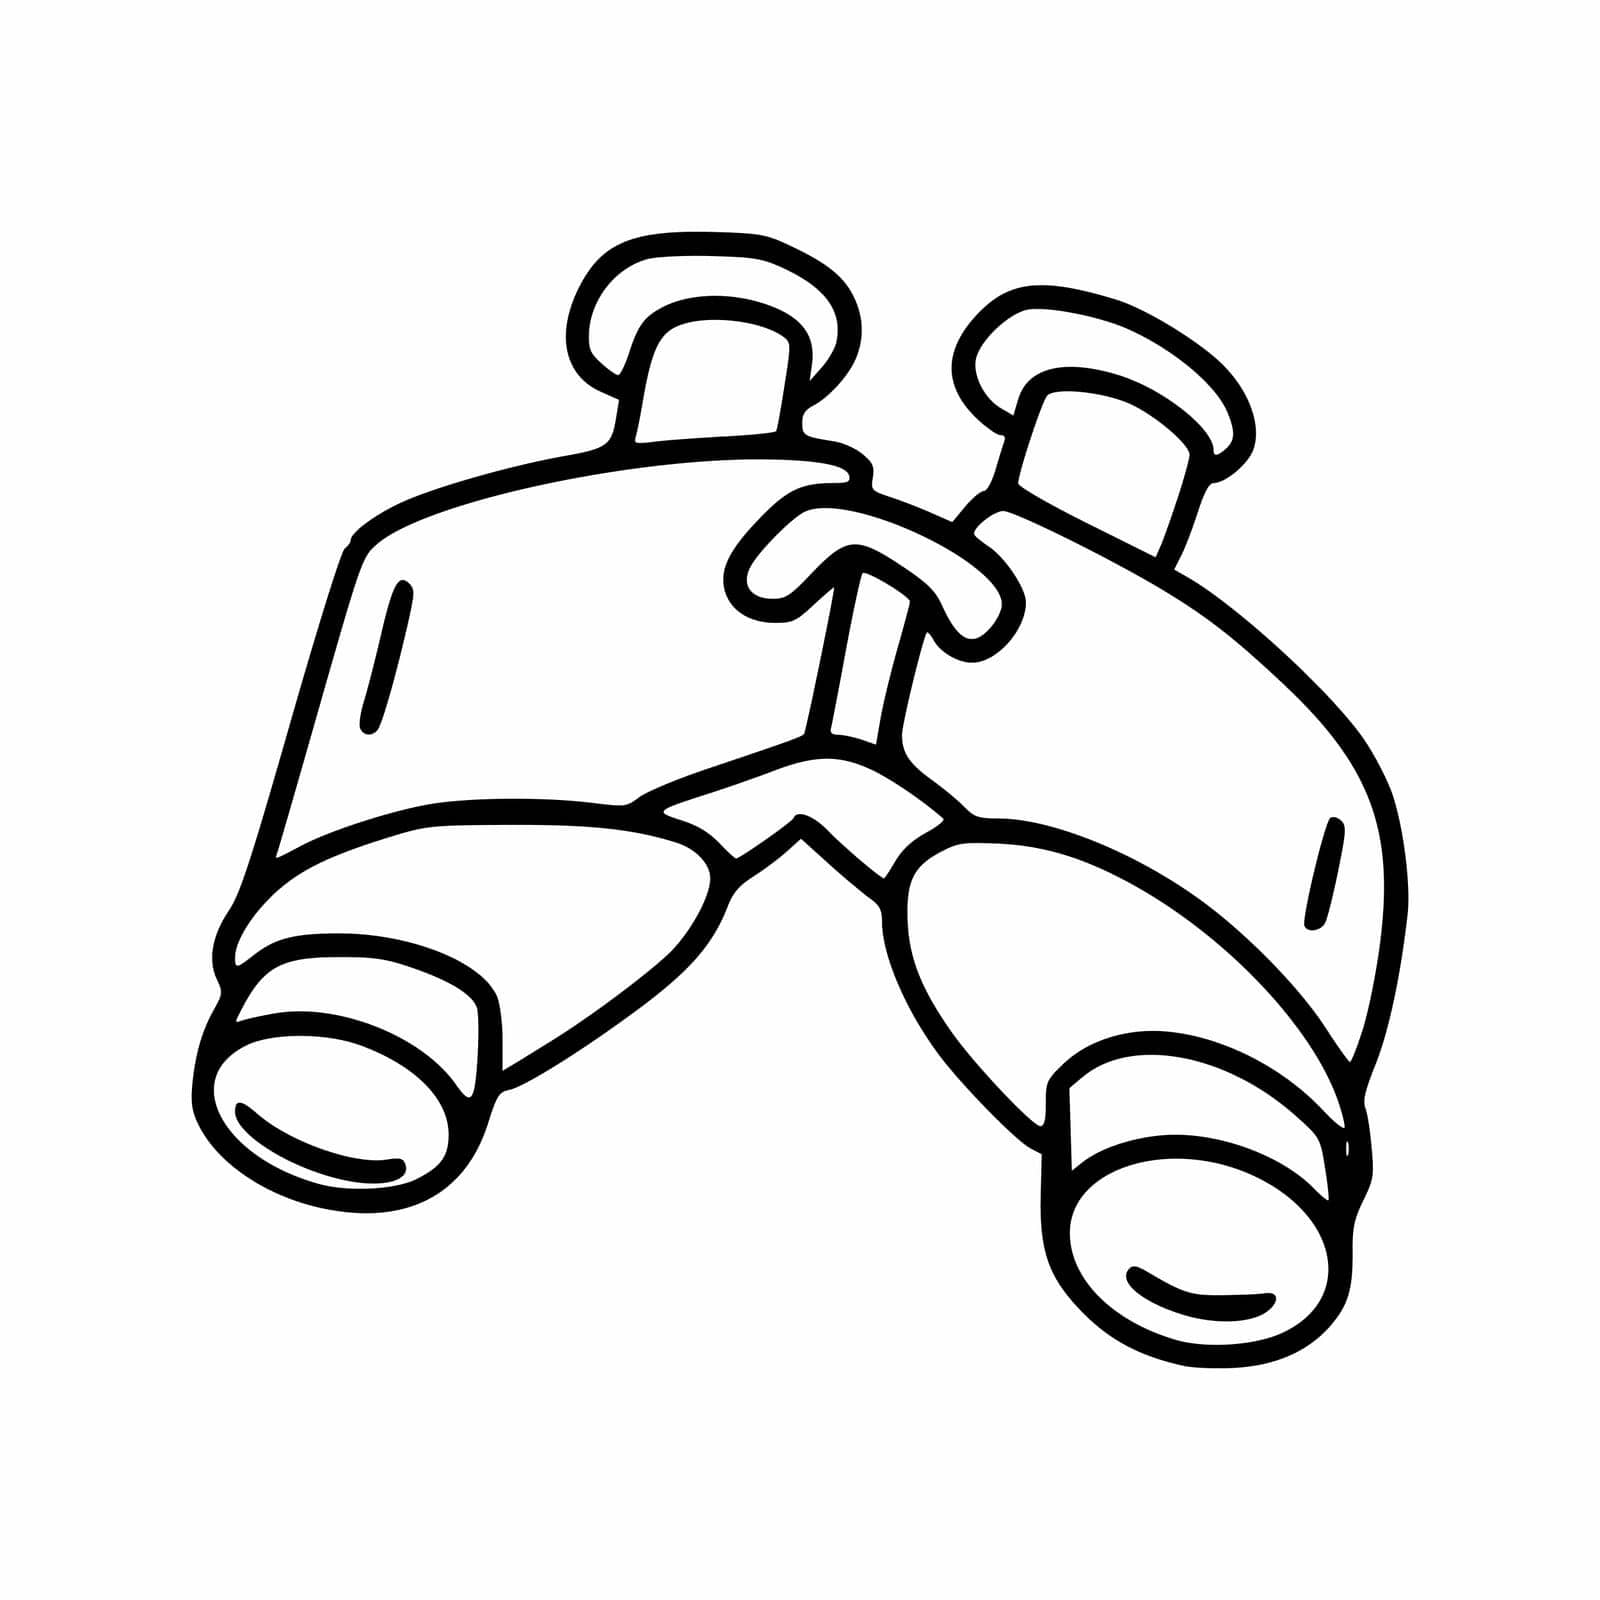 Doodle style binocular drawing. Vector icon on white background. by polinka_art